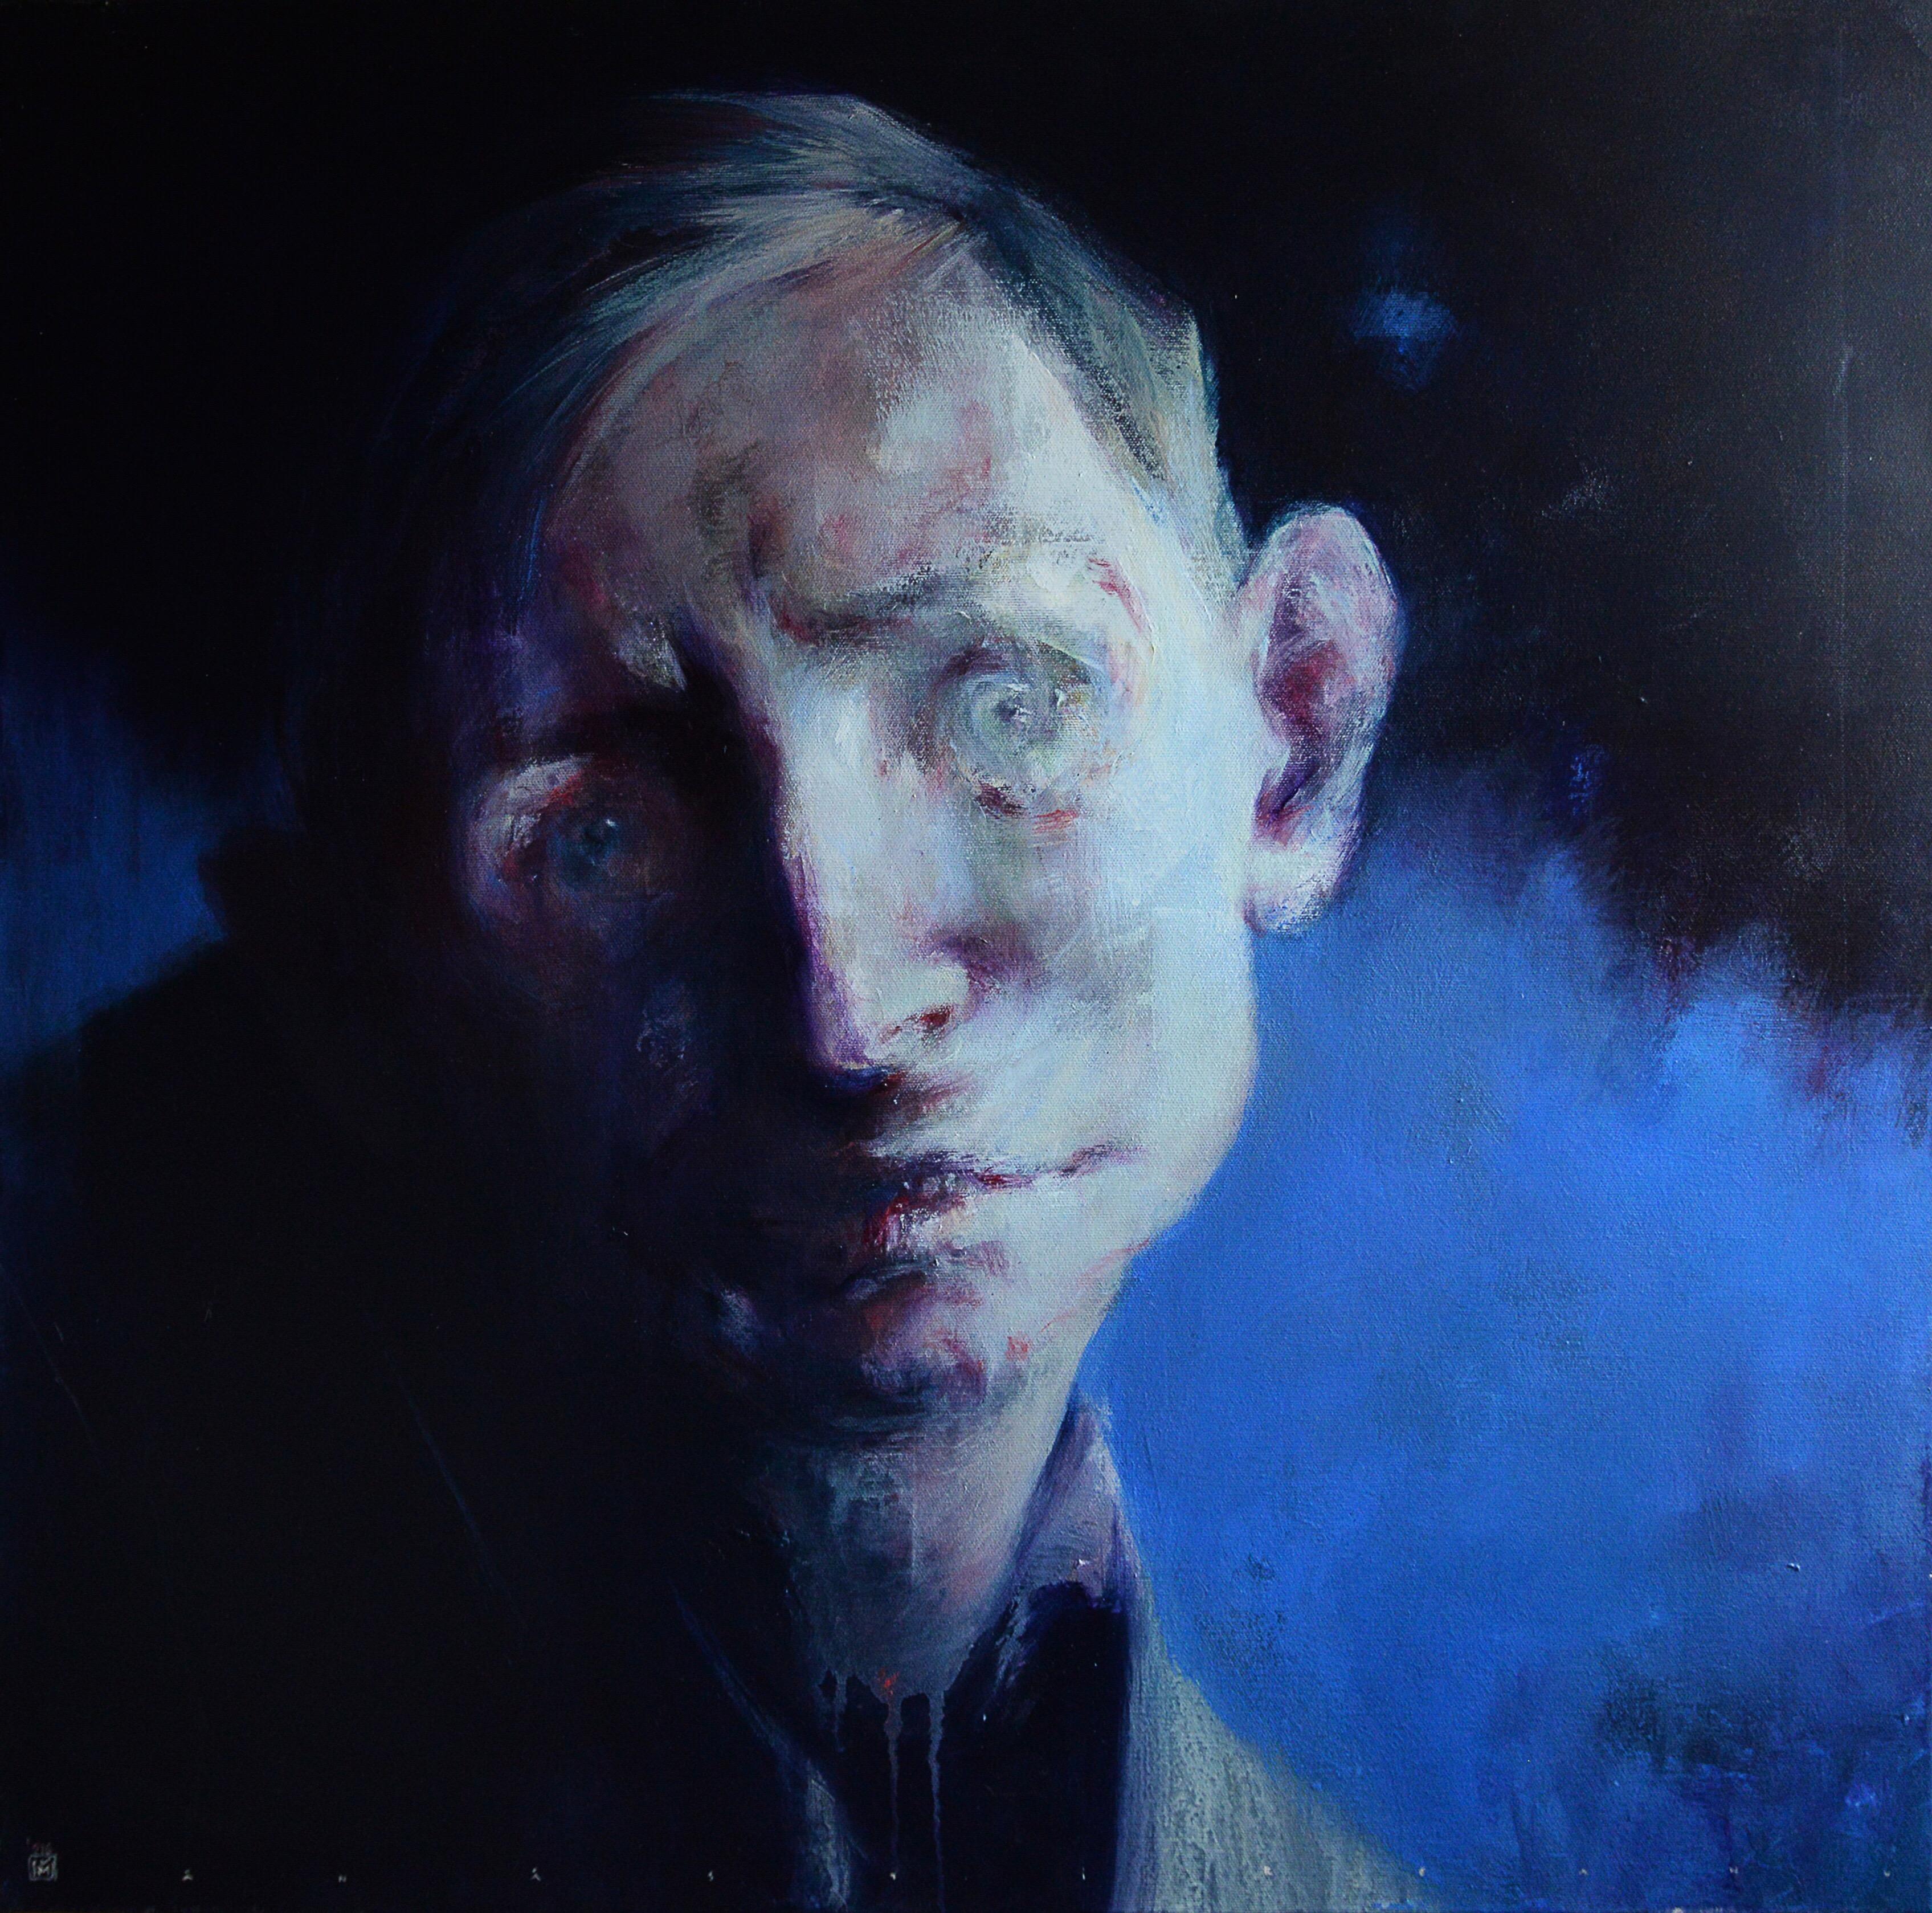 Emanuell is a Romanian contemporary artist, and member of the Union of Artists of Romania since 2001. His work was exhibited in London, Brussels, Bucharest and around Romania and the UK. This is a portrait of Prof Stephen Hawking.